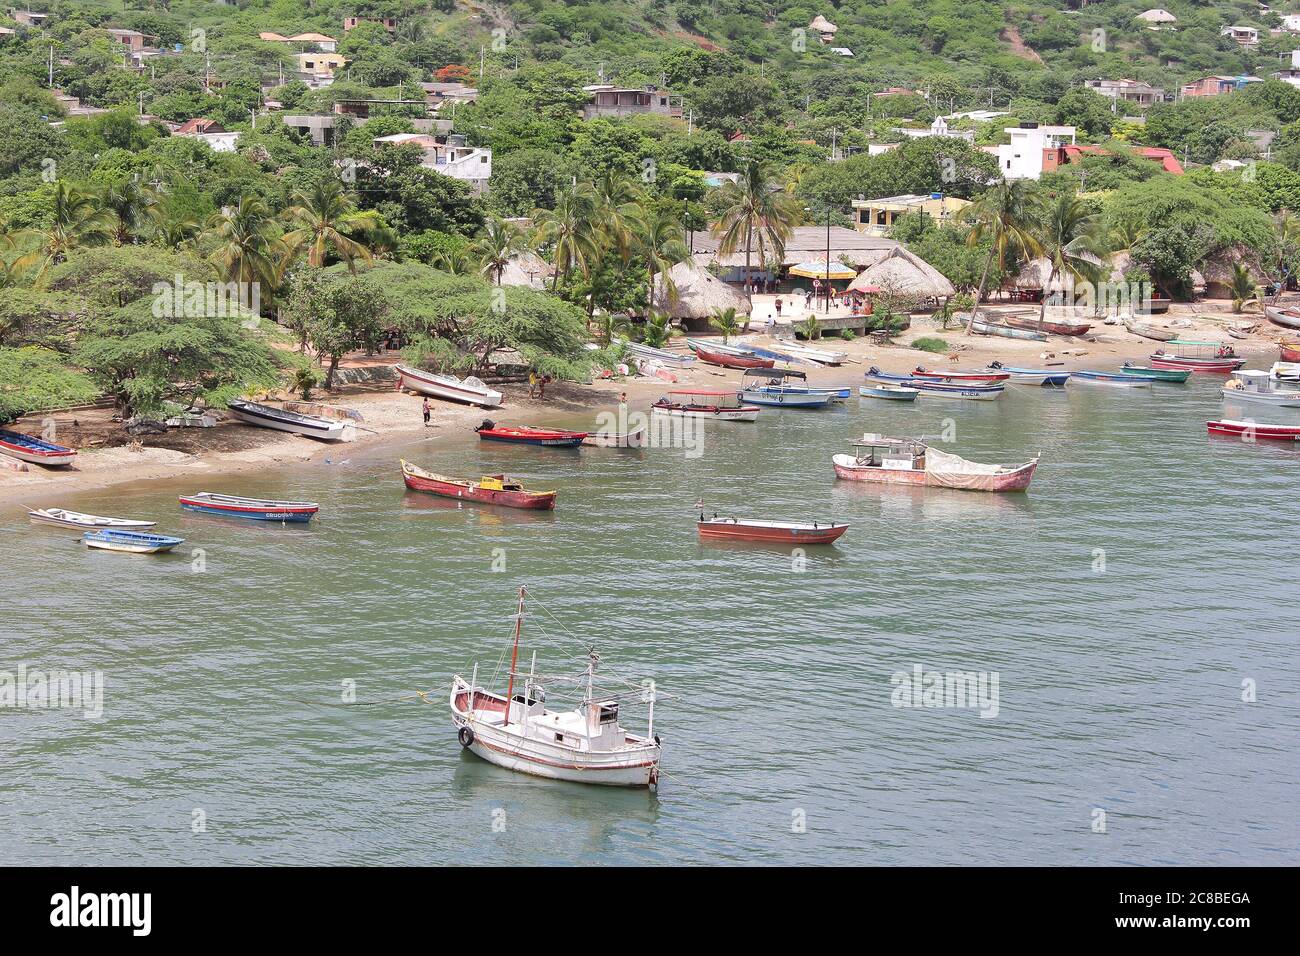 TAGANGA, COLOMBIA - JUNE 22, 2011: Taganga is a small fishing town located 7km away from Santa Marta on the Caribbean coast of Colombia Stock Photo